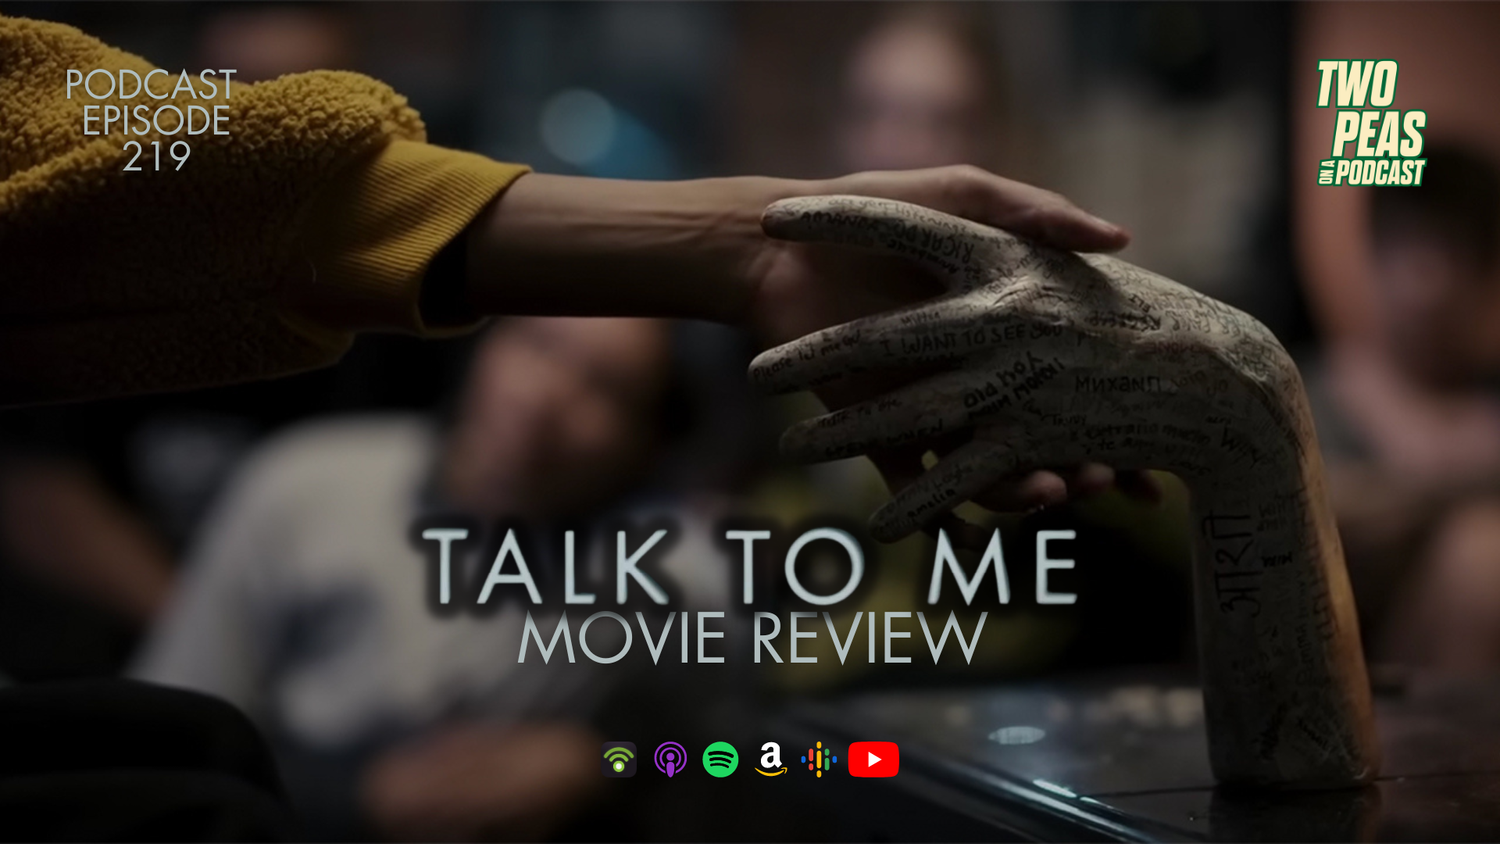 TALK TO ME Movie Review (219)